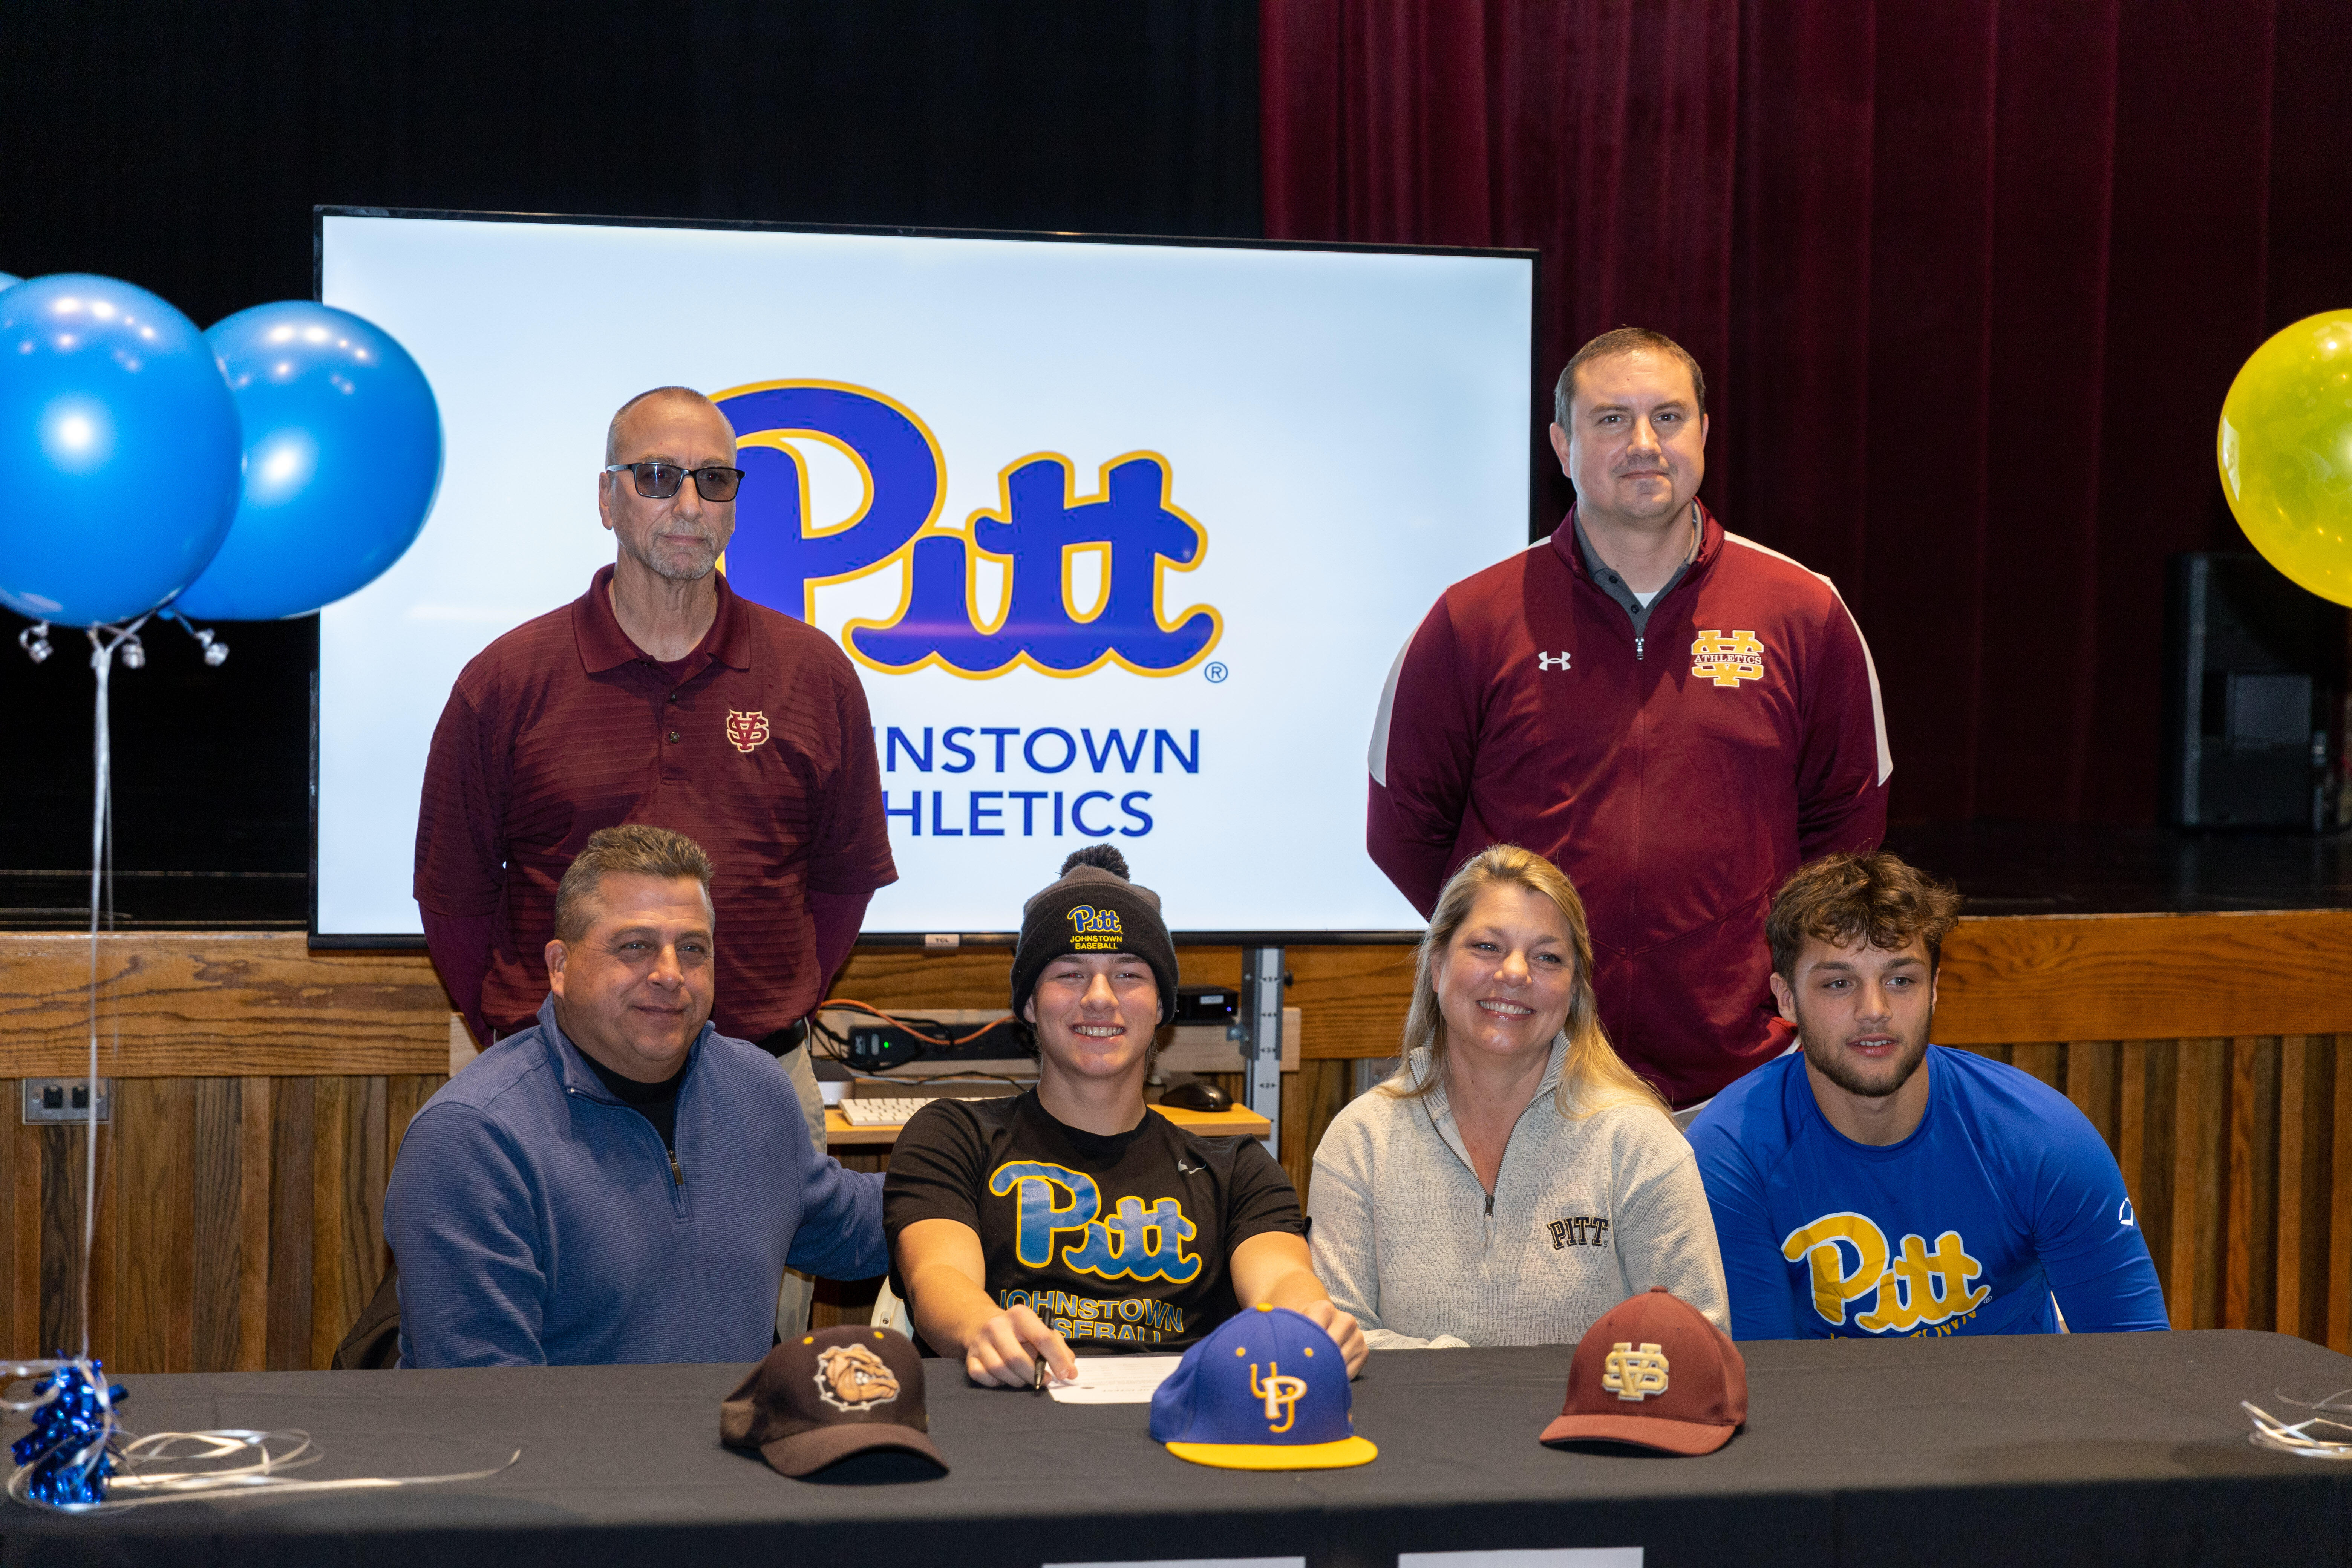 Steel Valley senior Roman Donis signs his National Letter of Intent to play collegiate baseball at Pitt-Johnston. Joining him at the ceremony were his parents, Mark and Marnyn Donis, brother Noah Donis, Steel Valley varsity baseball head coach Kevin Walsh (standing) and Steel Valley varsity assistant baseball coach Matthew Simpson (standing).